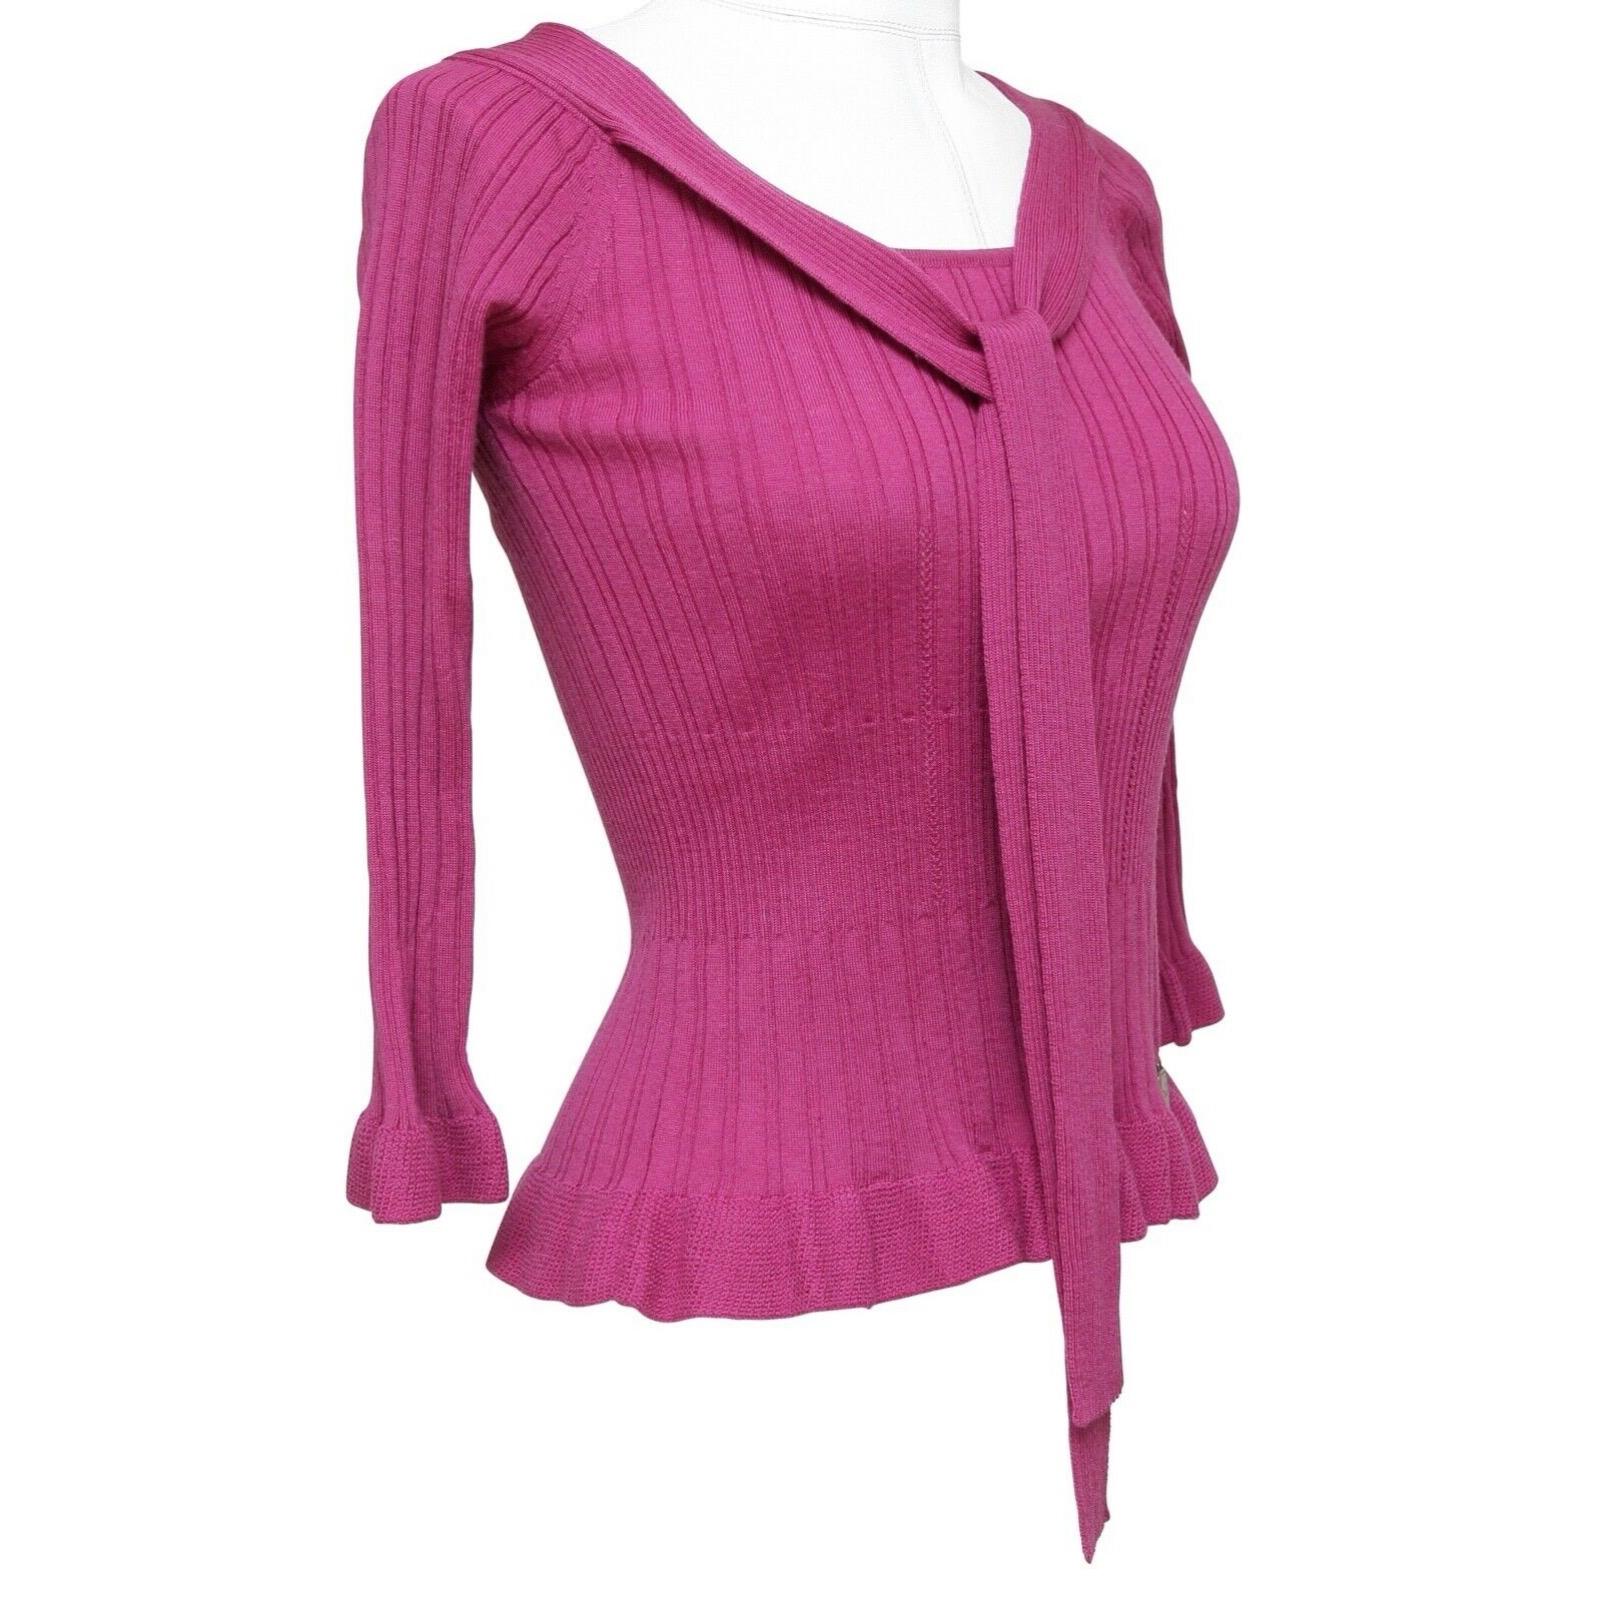 GUARANTEED AUTHENTIC LOVELY CHRISTIAN DIOR MAGENTA KNIT SWEATER WITH NECK TIE

Details:
- Lightweight magenta ribbed wool pull-over sweater.
- Scoop neck with tie.
- 3/4 sleeve.
- Designer plaque at left hip.
- Flair at hem and cuffs.

Size: F 36,